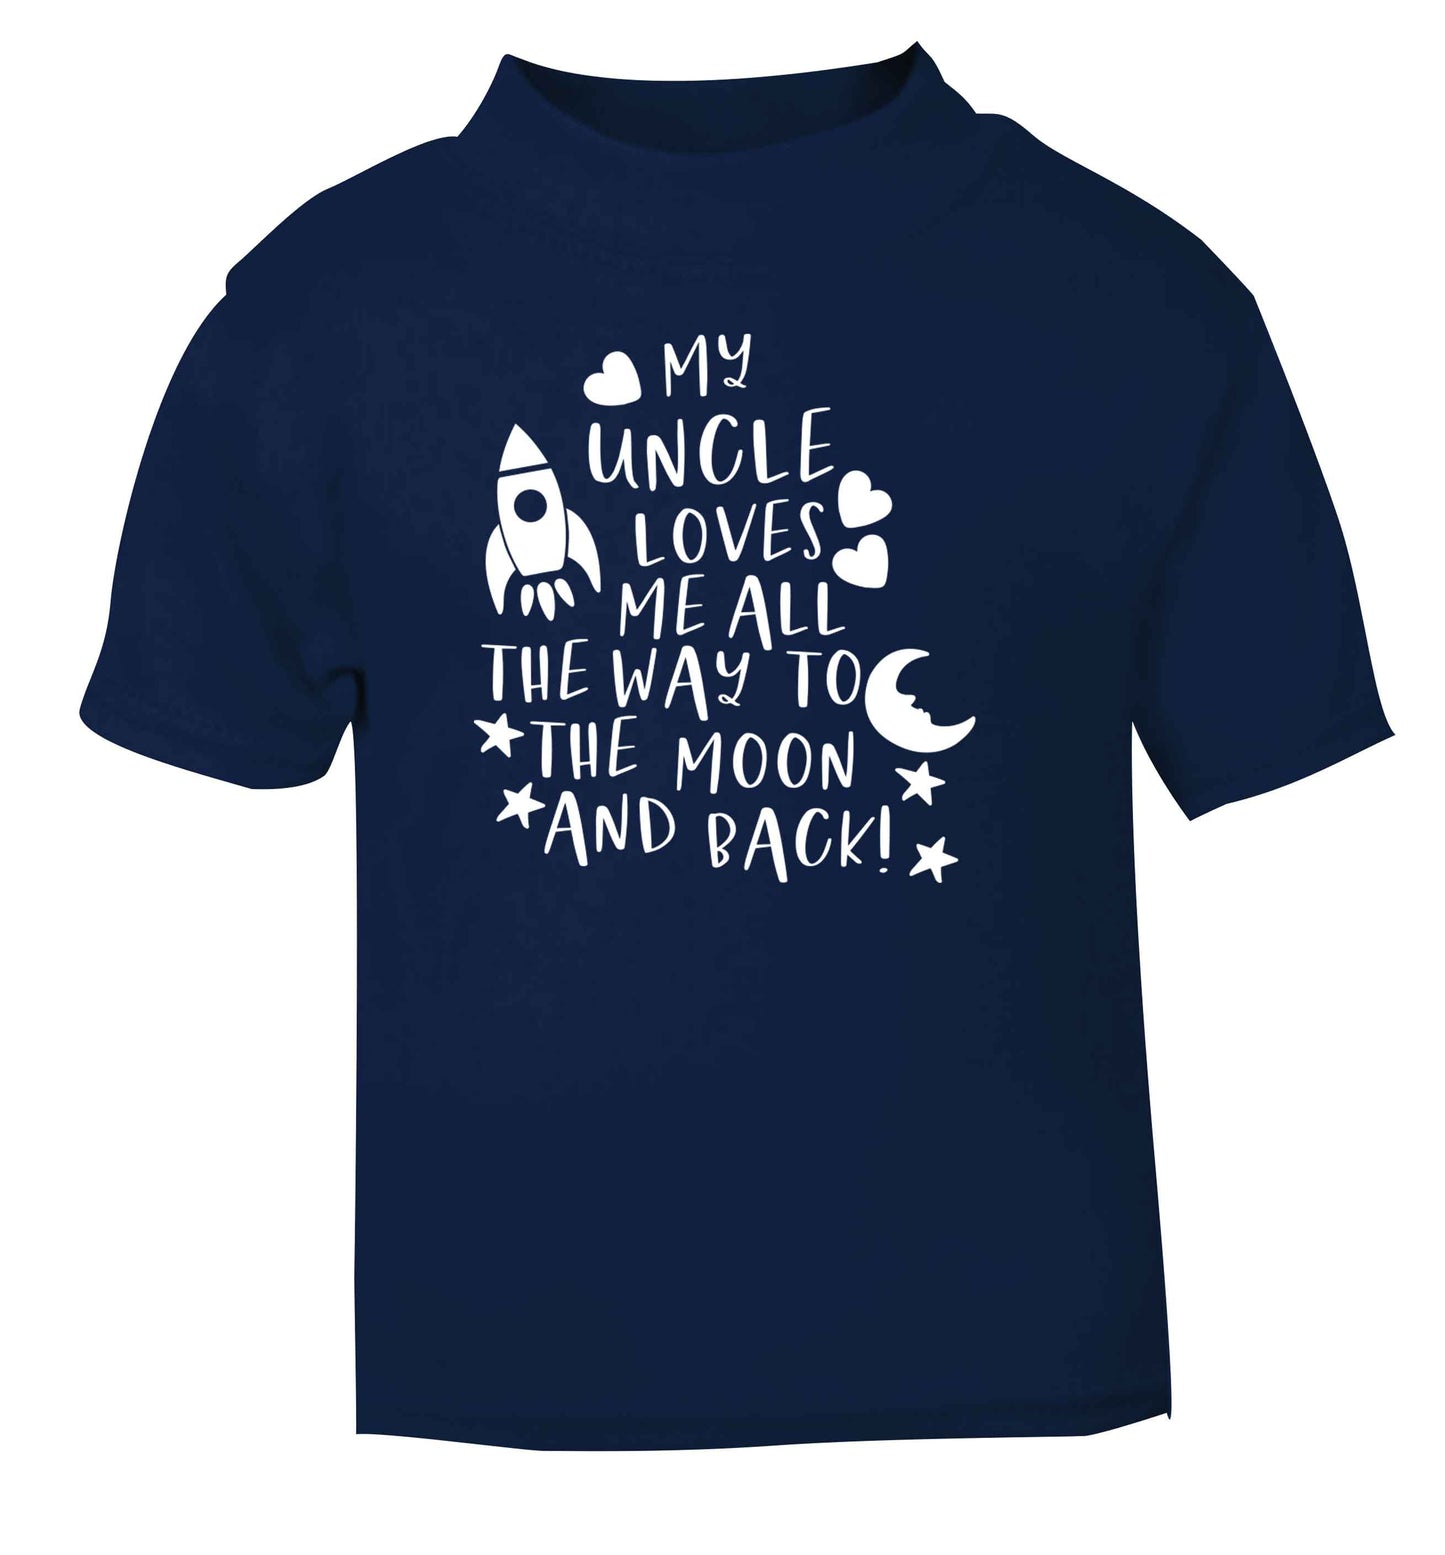 My uncle loves me all the way to the moon and back navy Baby Toddler Tshirt 2 Years